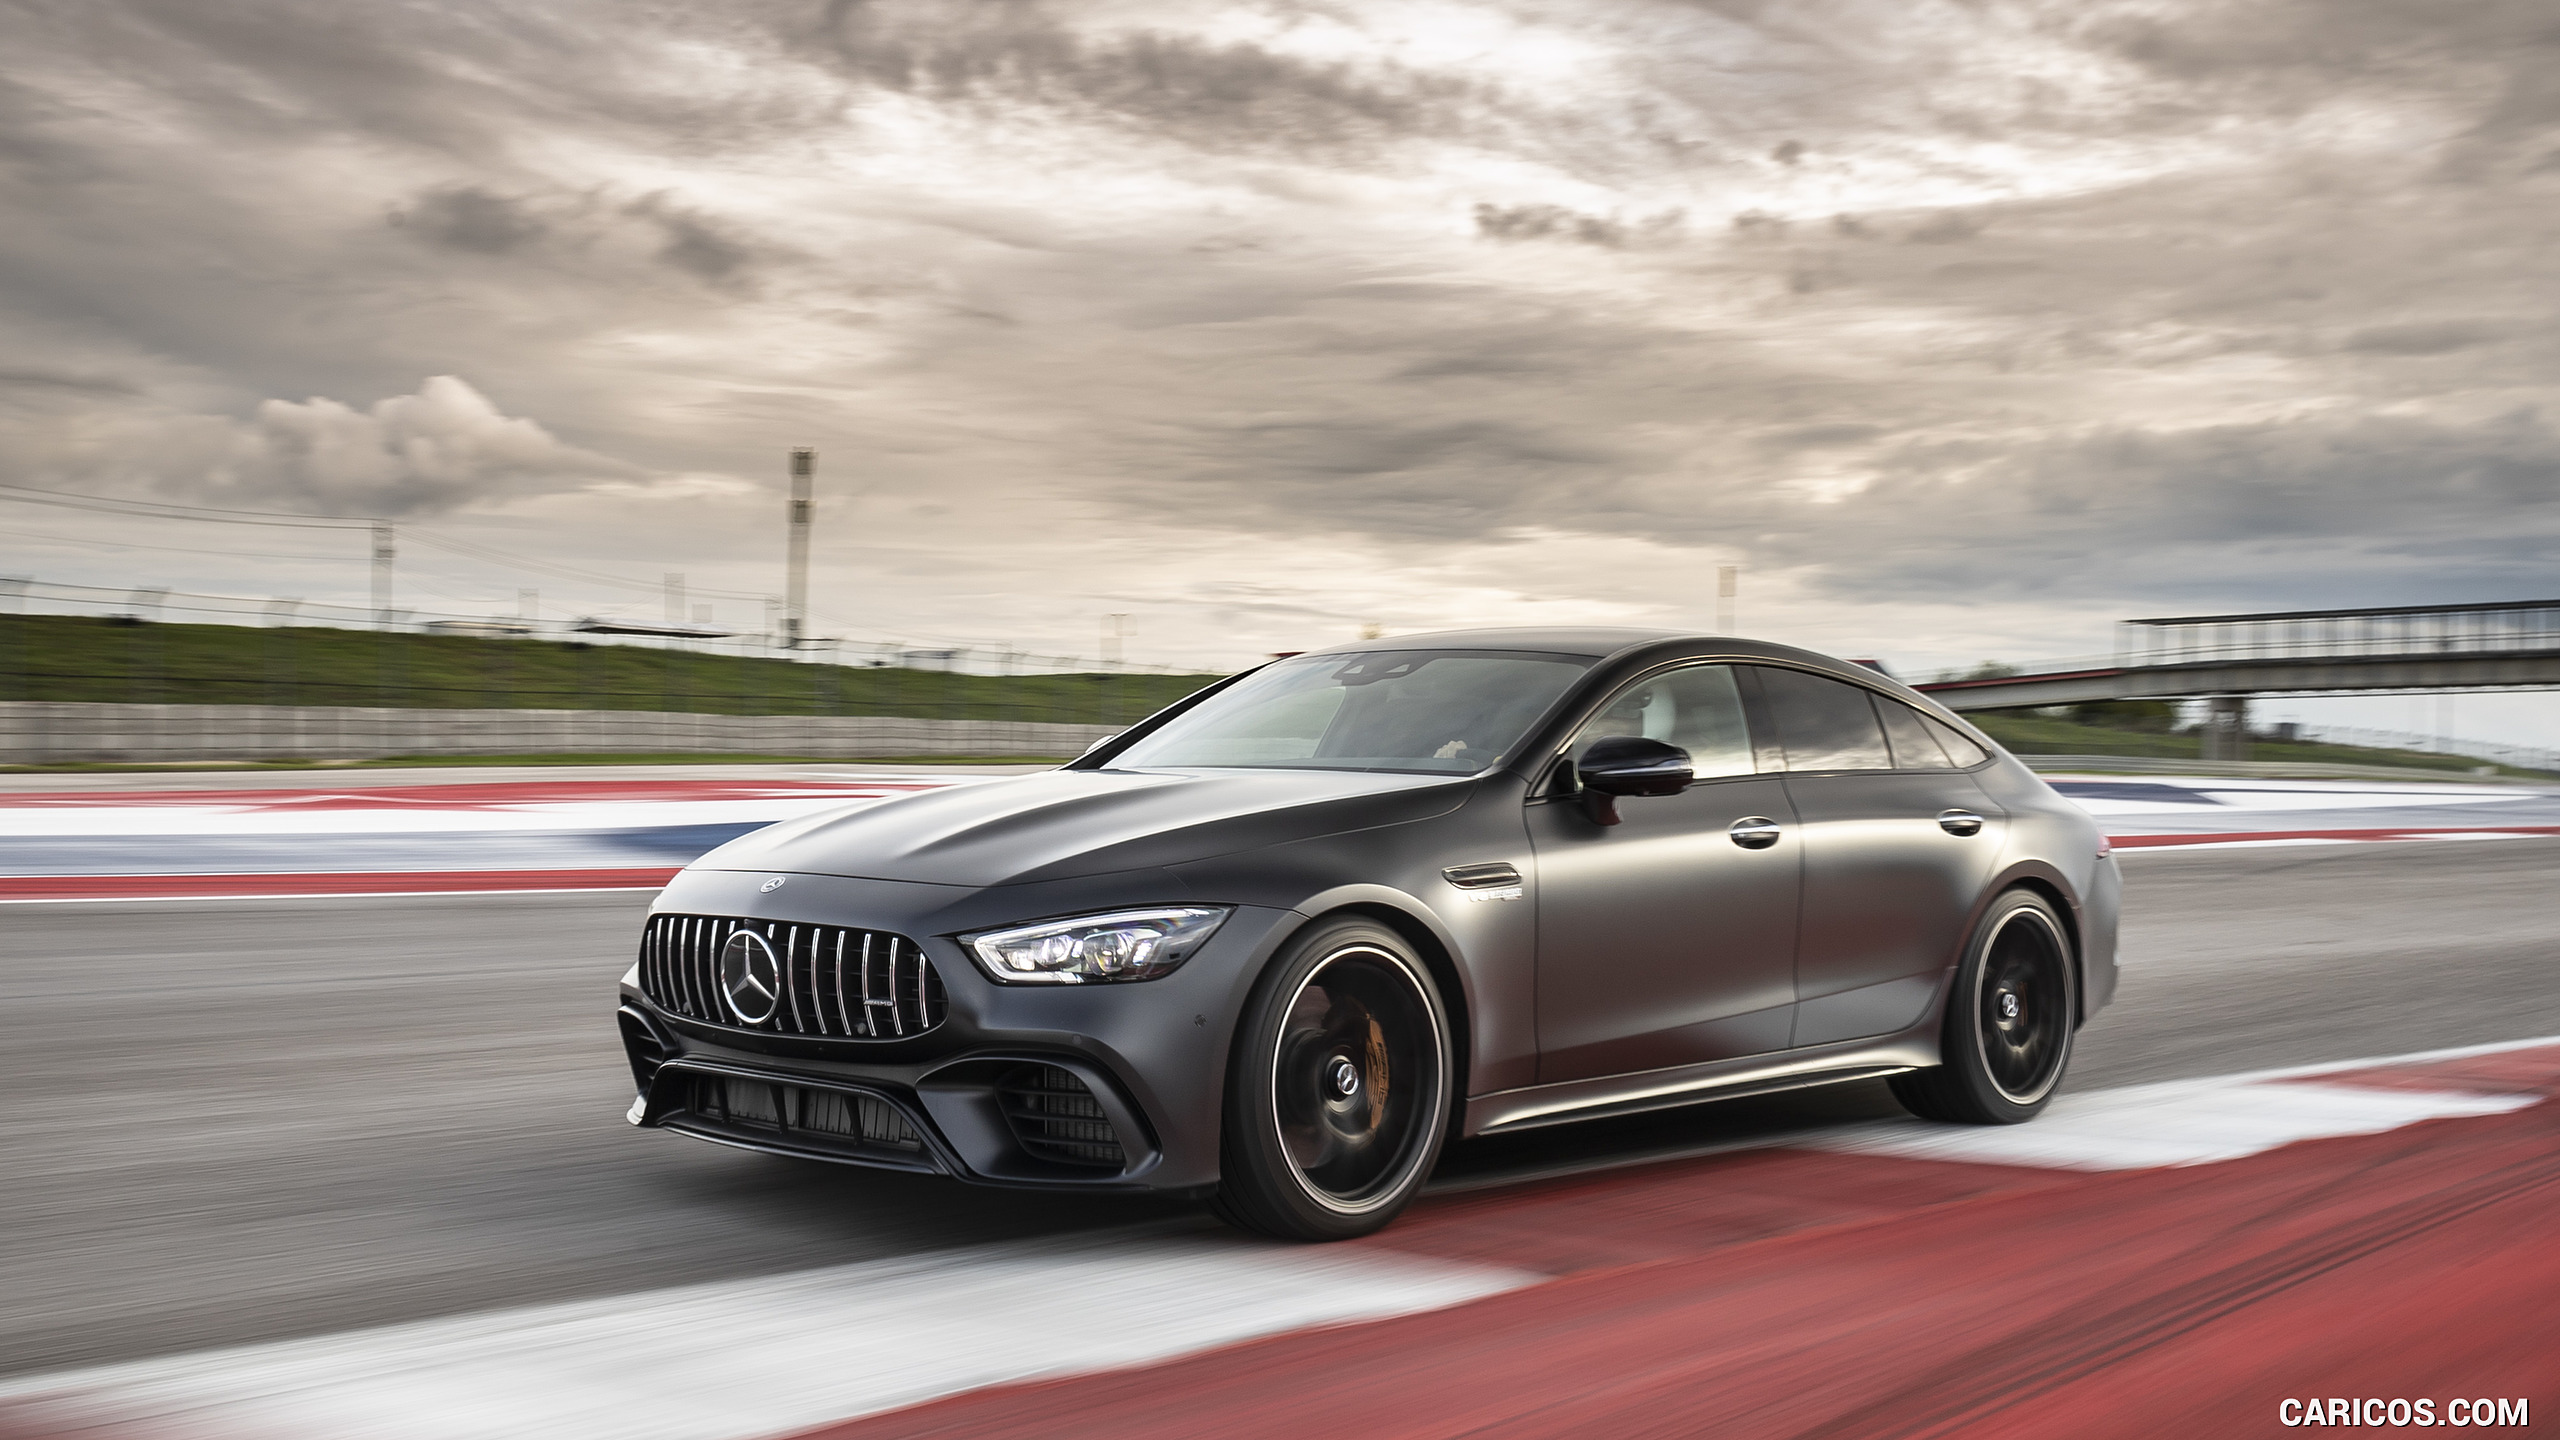 2019 Mercedes-AMG GT 63 S 4MATIC+ 4-Door Coupe - Front Three-Quarter, #178 of 427